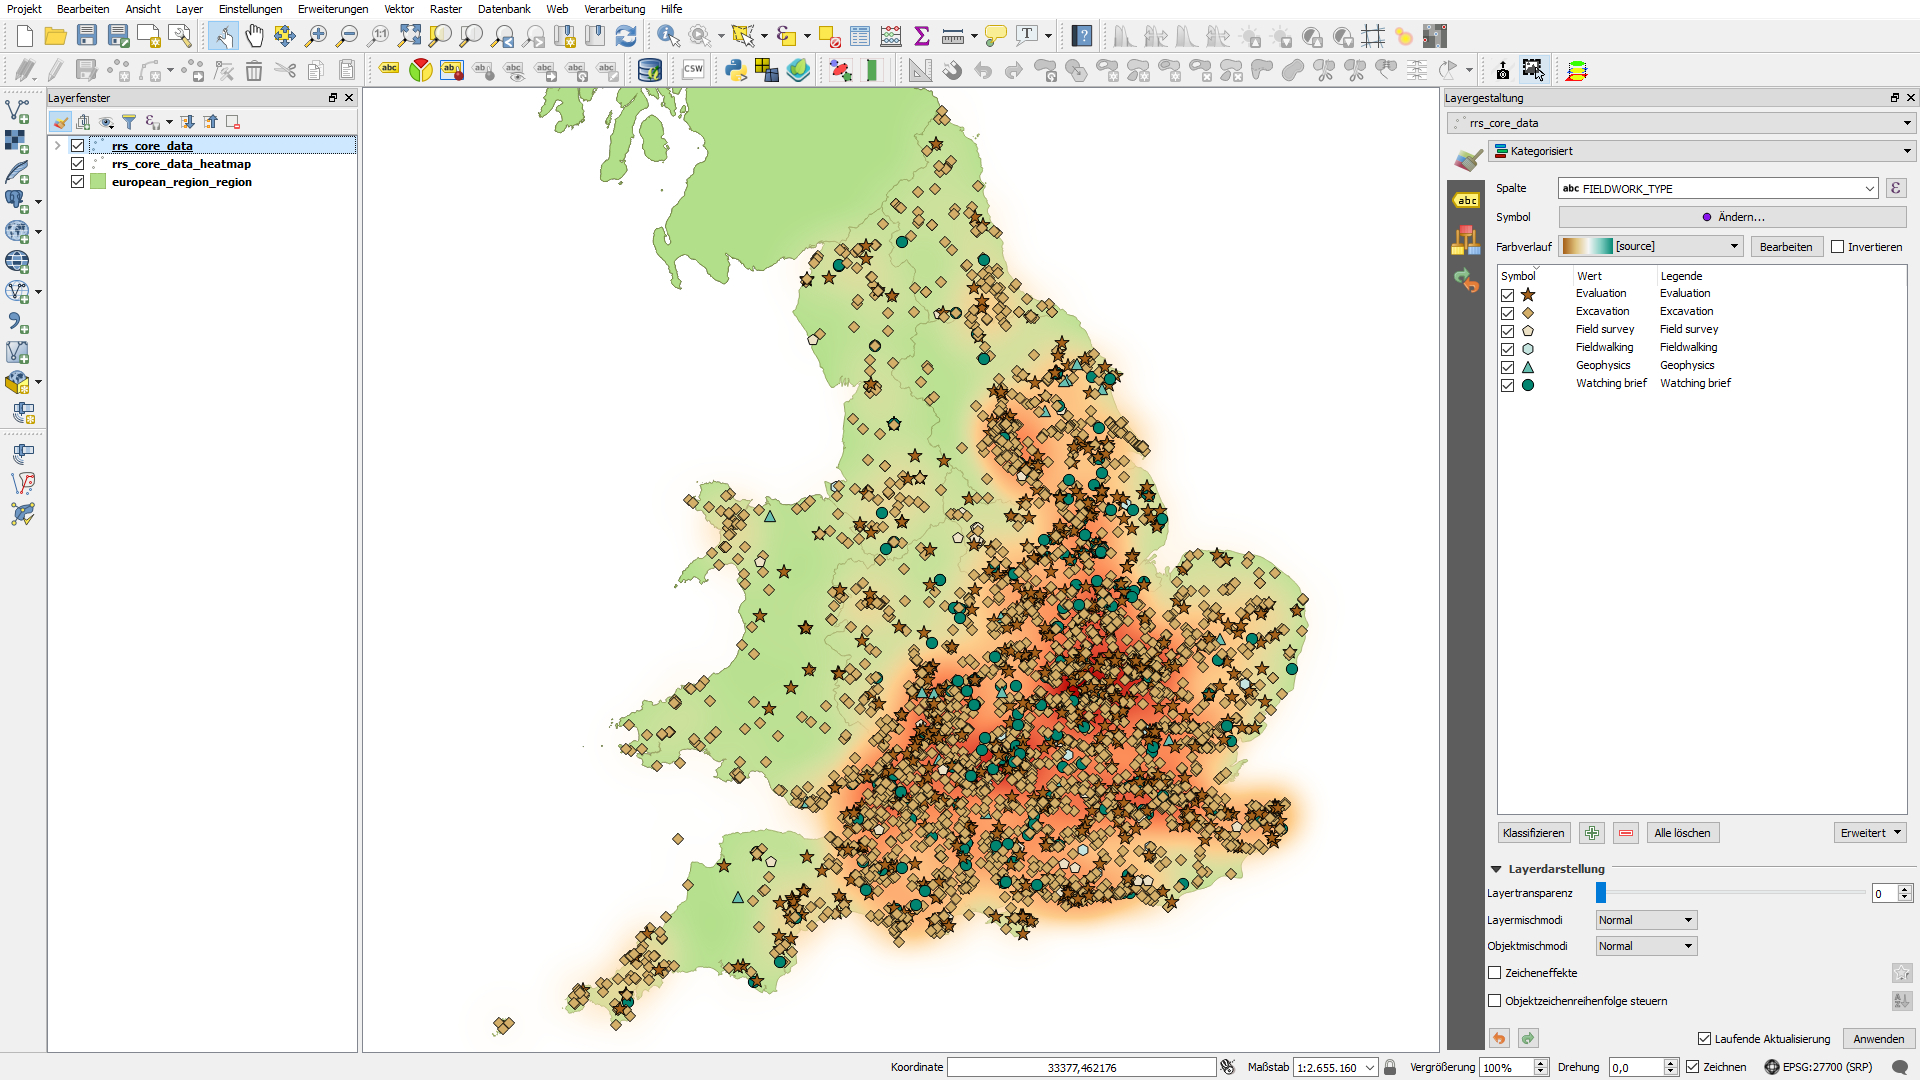 Data received from the deposit ‘The Rural Settlement of Roman Britain: an online resource’ loaded in QGIS 2.18.